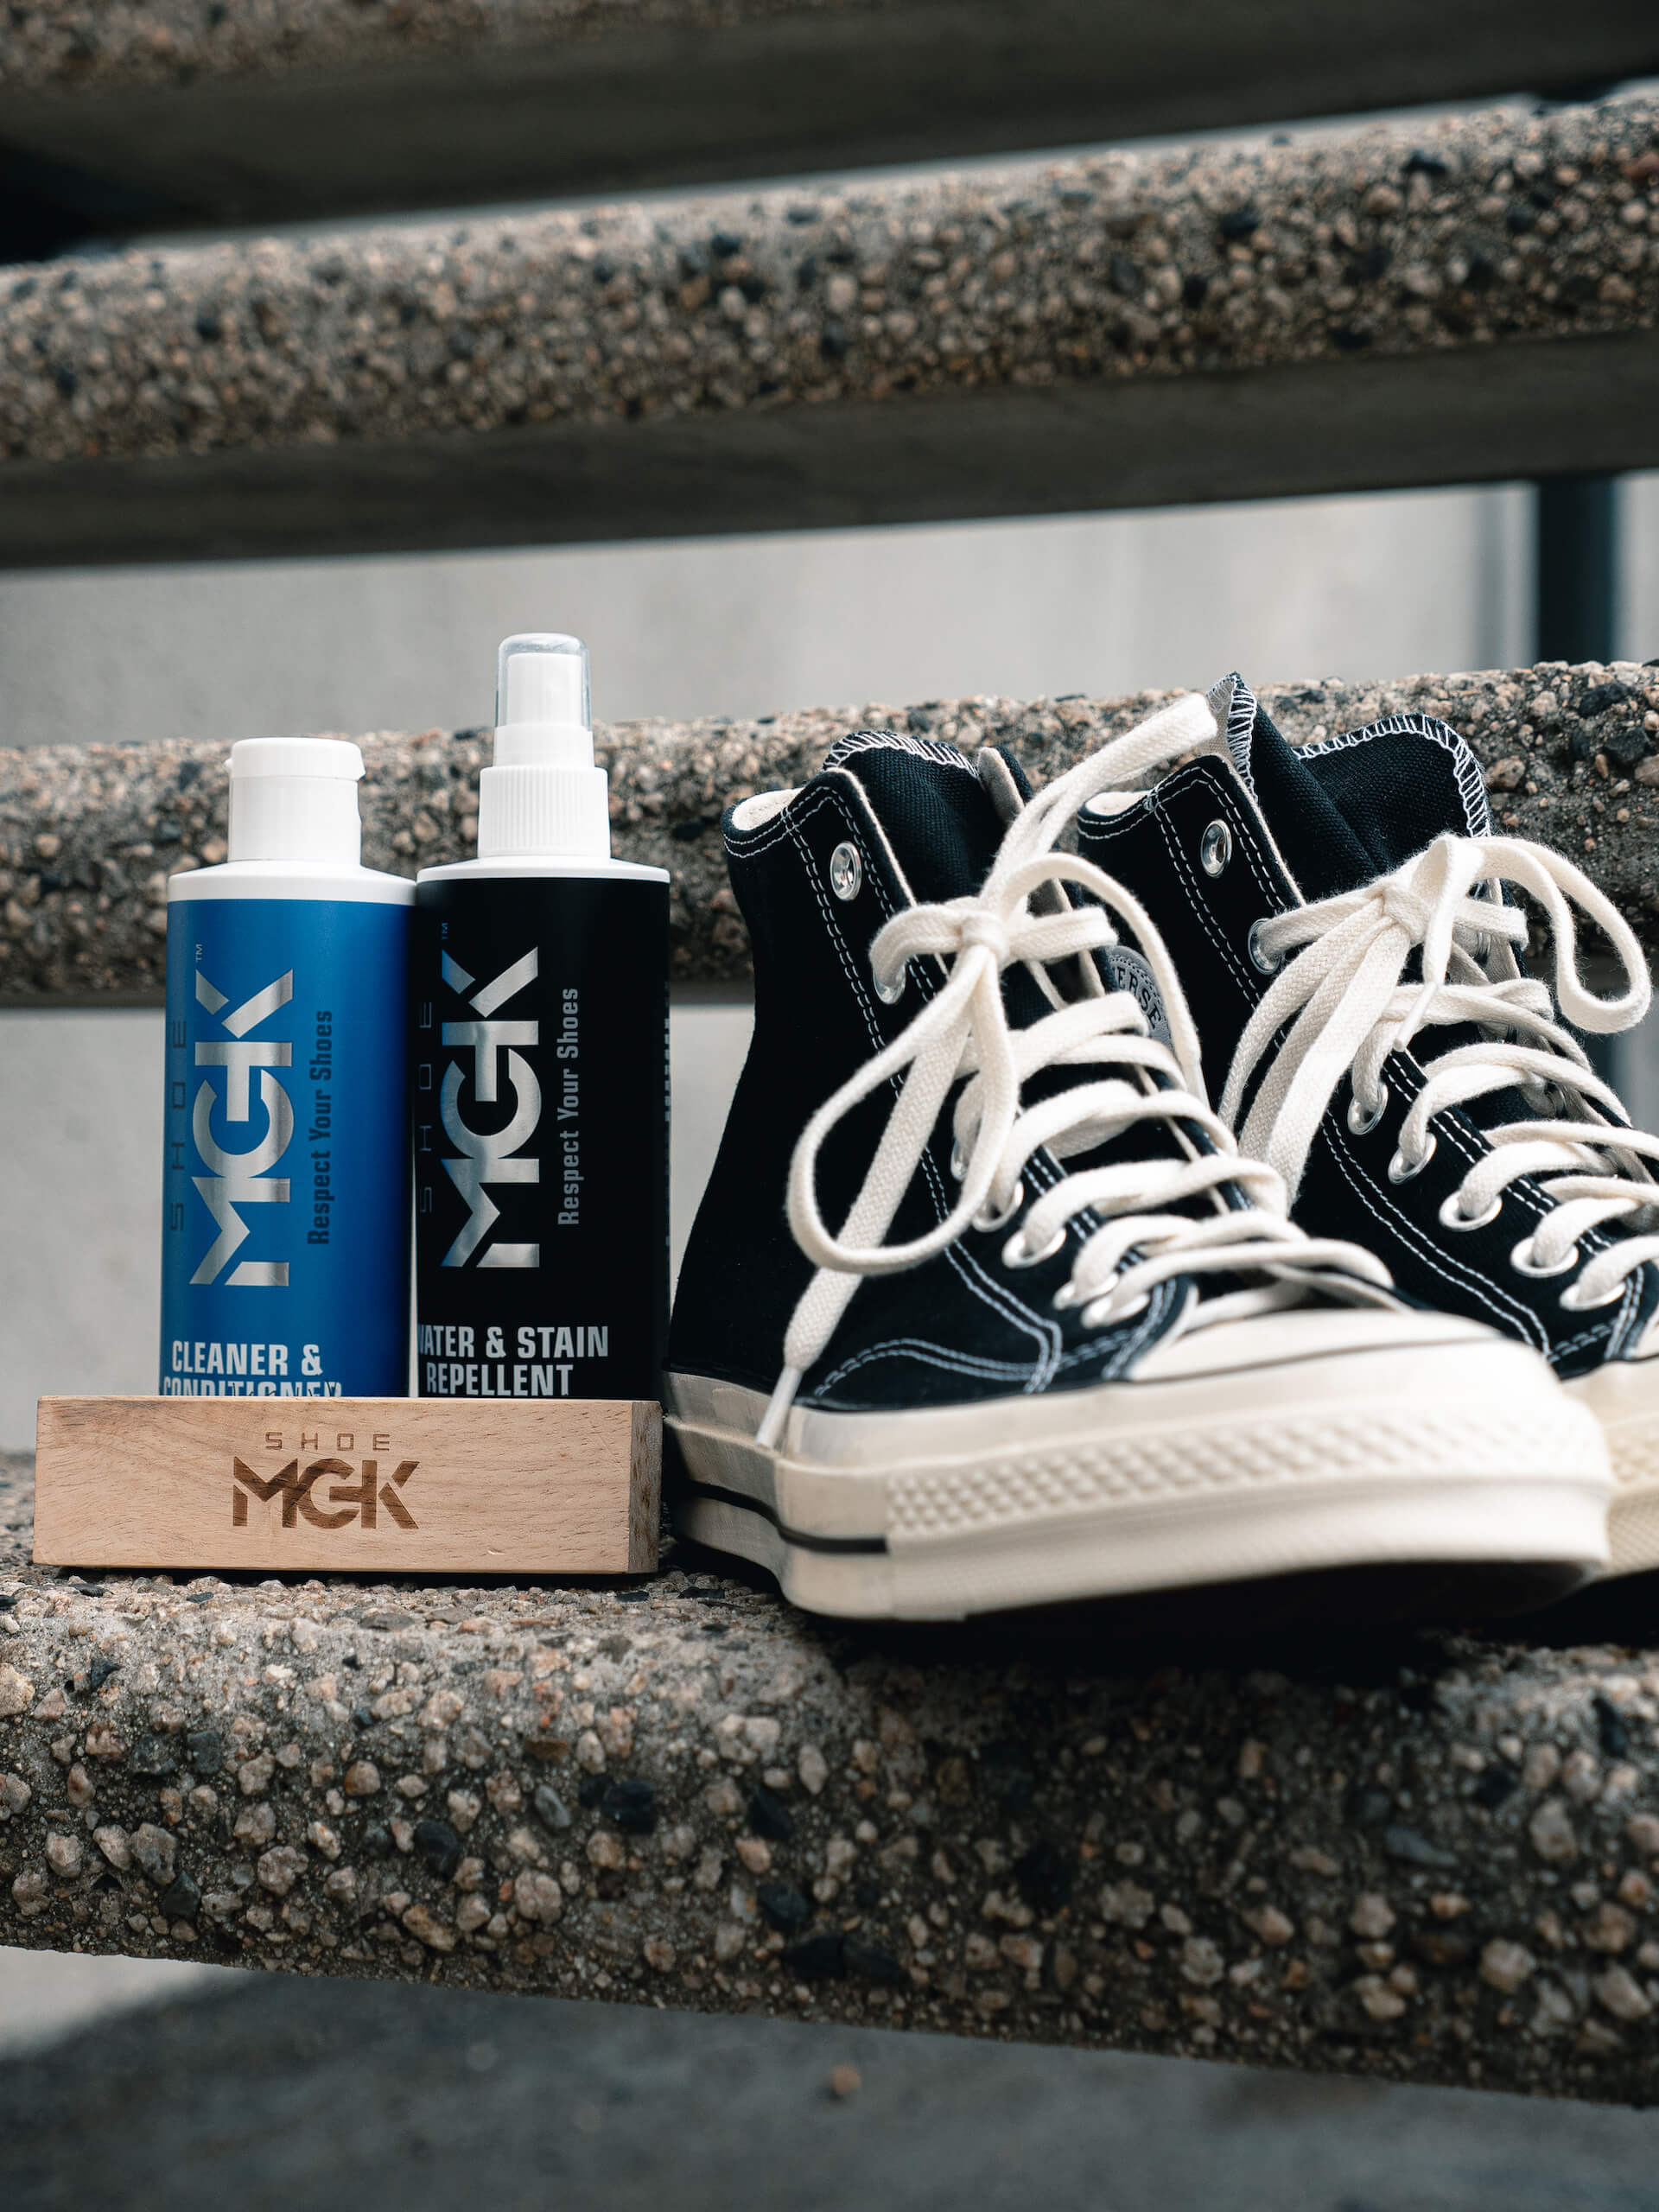 How To Clean Canvas Converse - Shoe MGK